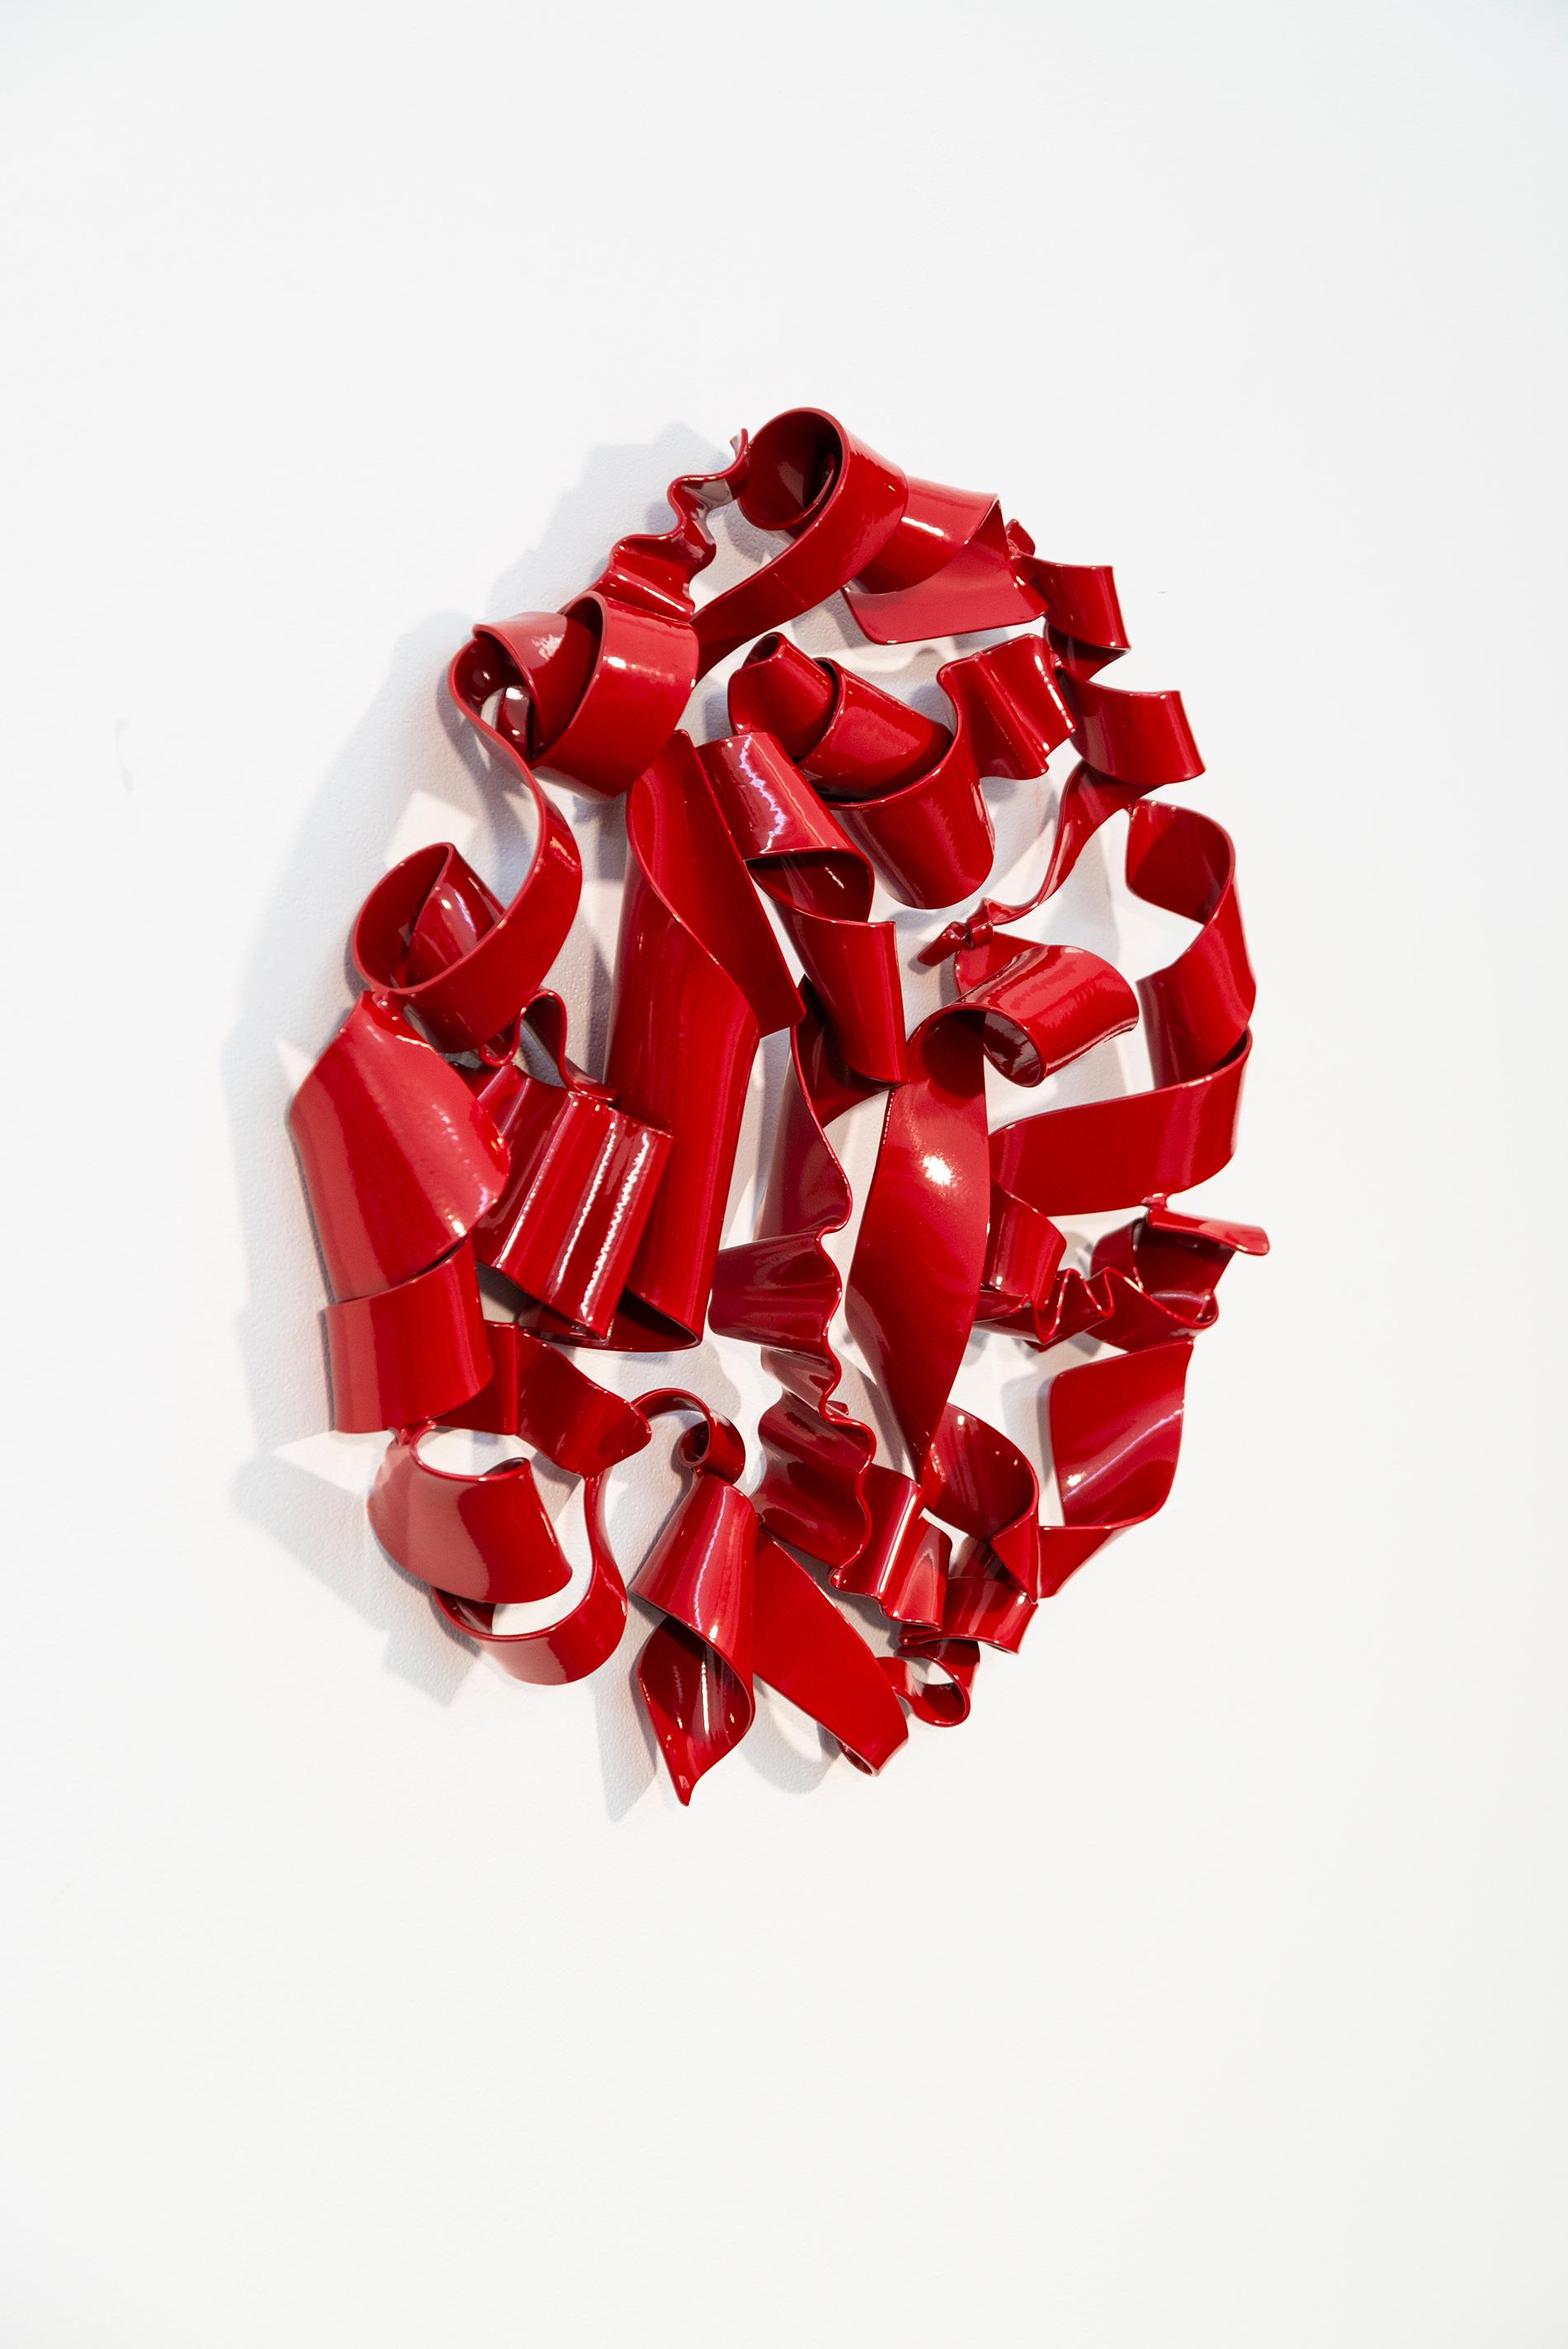 Tabula Rasa 1 - red, contemporary, abstract, powder coated steel, wall sculpture - Contemporary Sculpture by Stefan Duerst